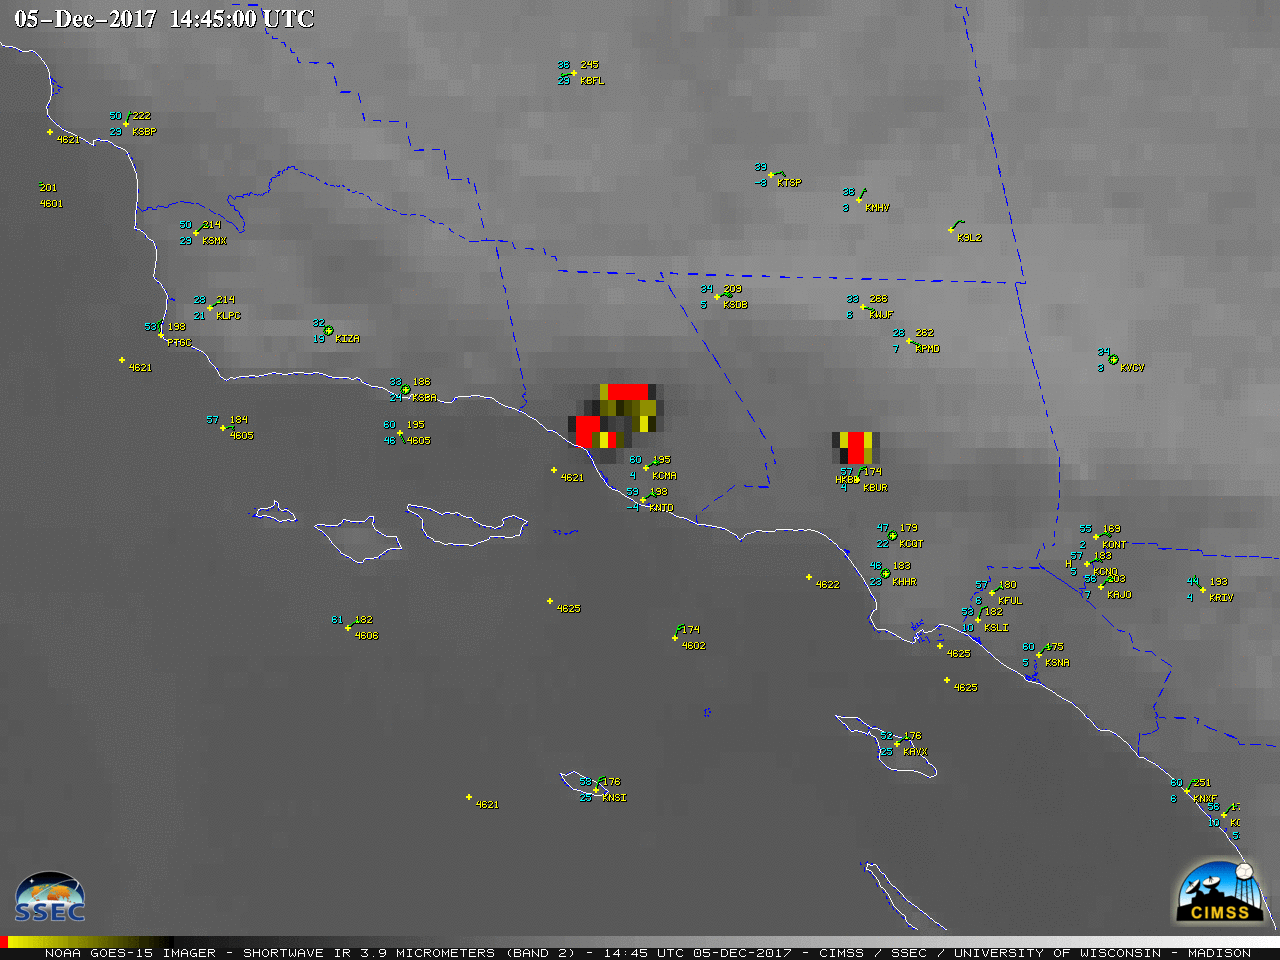 GOES-15 Shortwave Infrared (3.9 µm) images, with hourly surface plots [click to play MP4 animation]